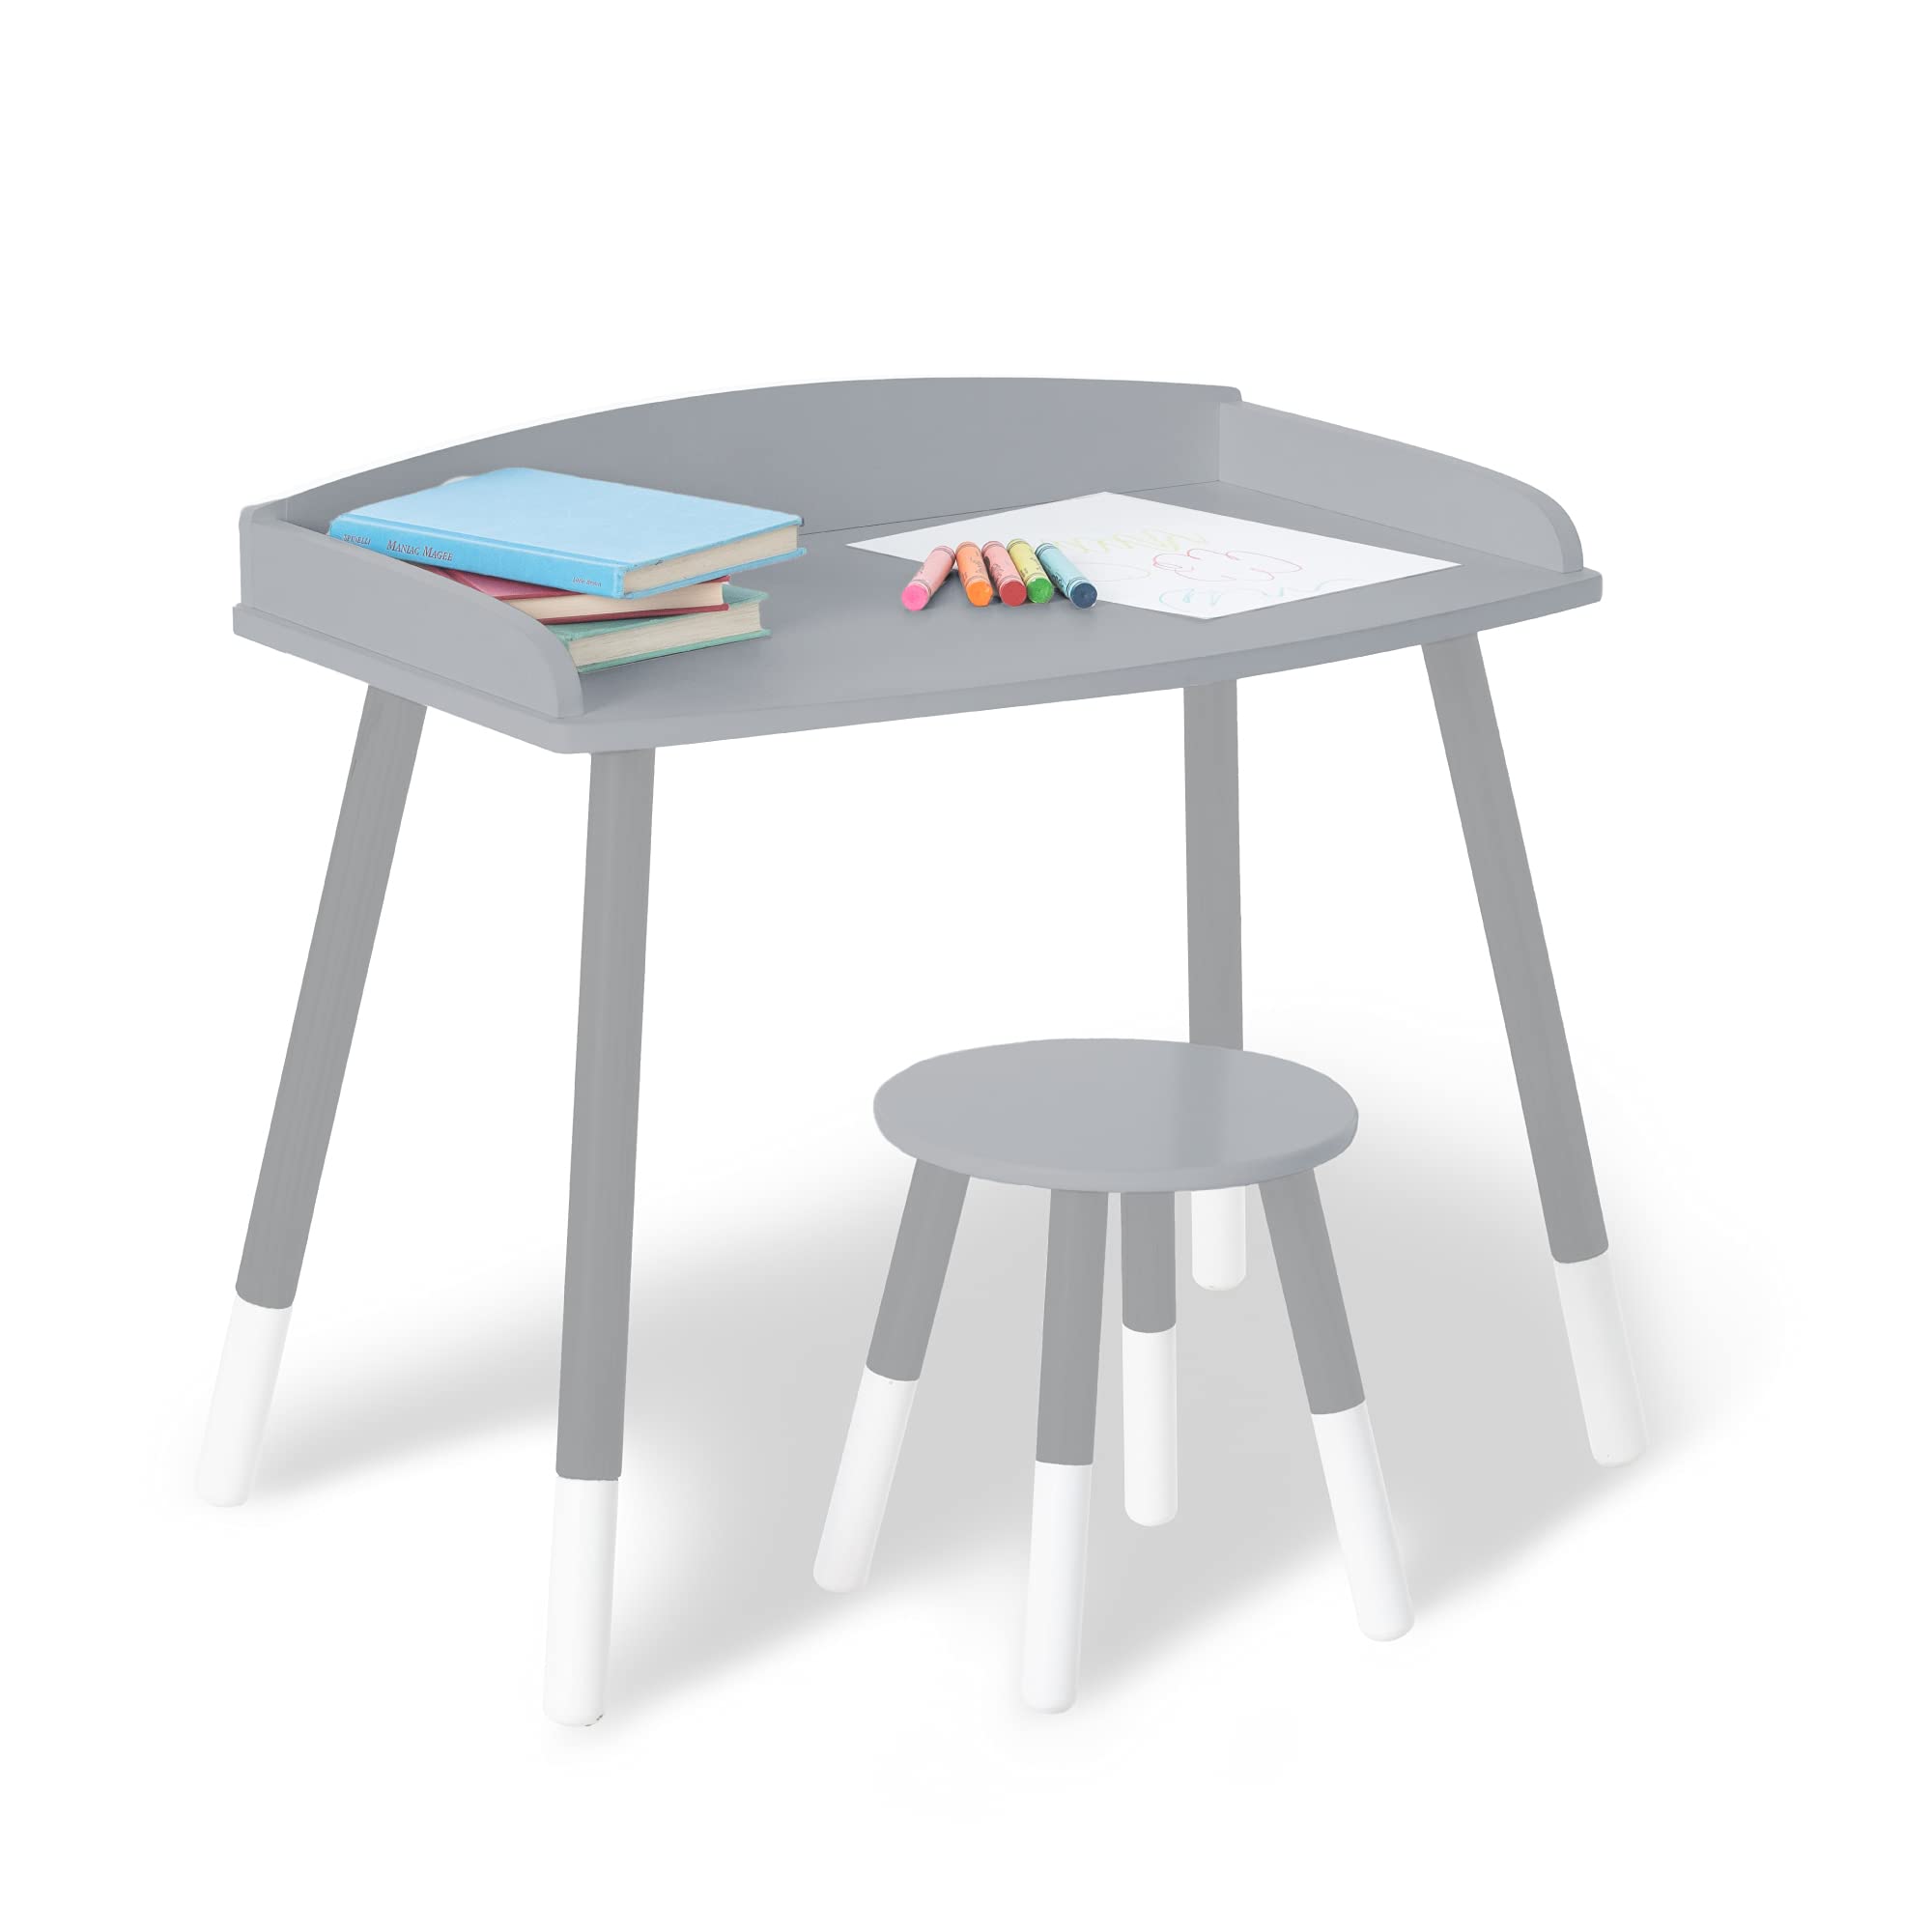 Wildkin Kids Modern Study Desk and Stool Set for Boys and Girls, Includes One Matching Stool, Classic Timeless Design Features Panel Edges on Tabletop and Solid Wood Legs (Gray w/White)